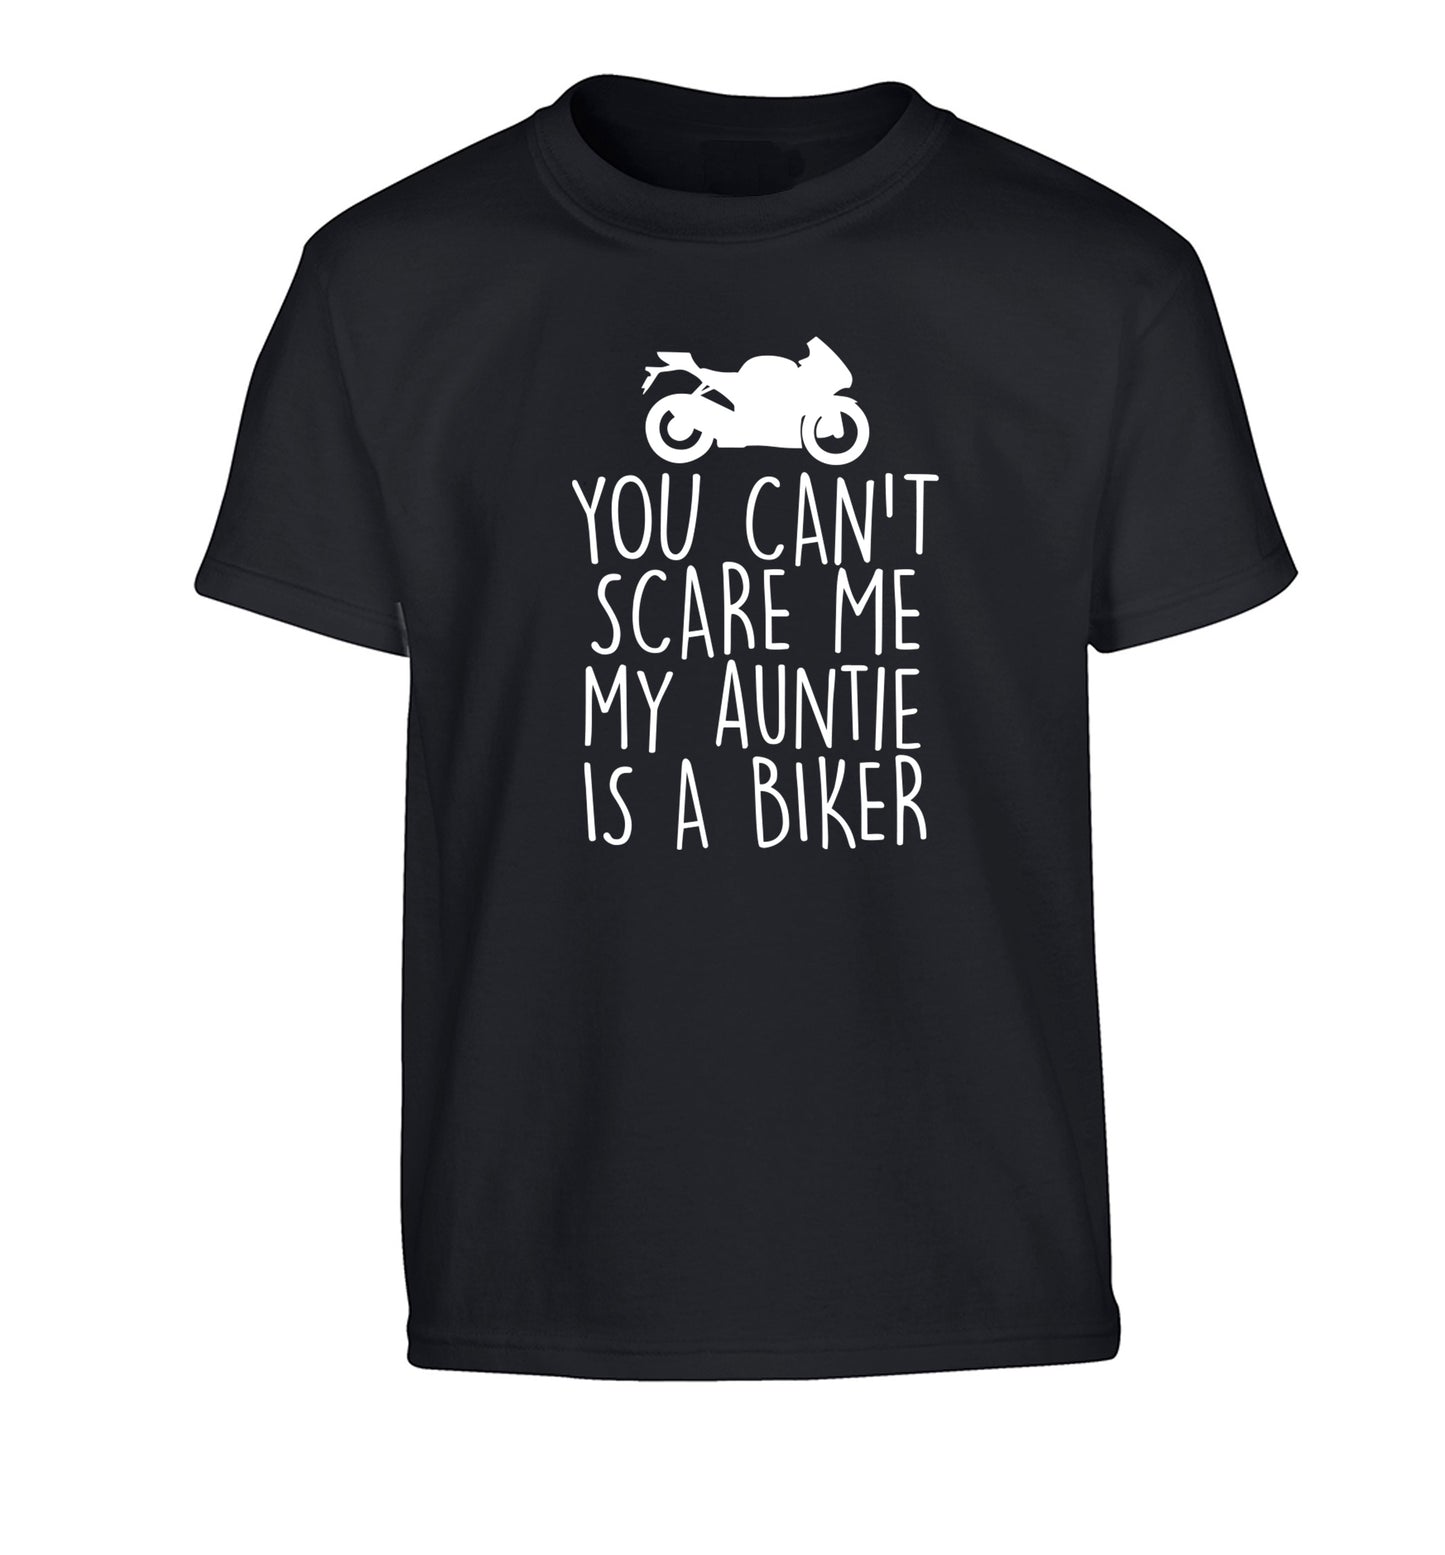 You can't scare me my auntie is a biker Children's black Tshirt 12-13 Years